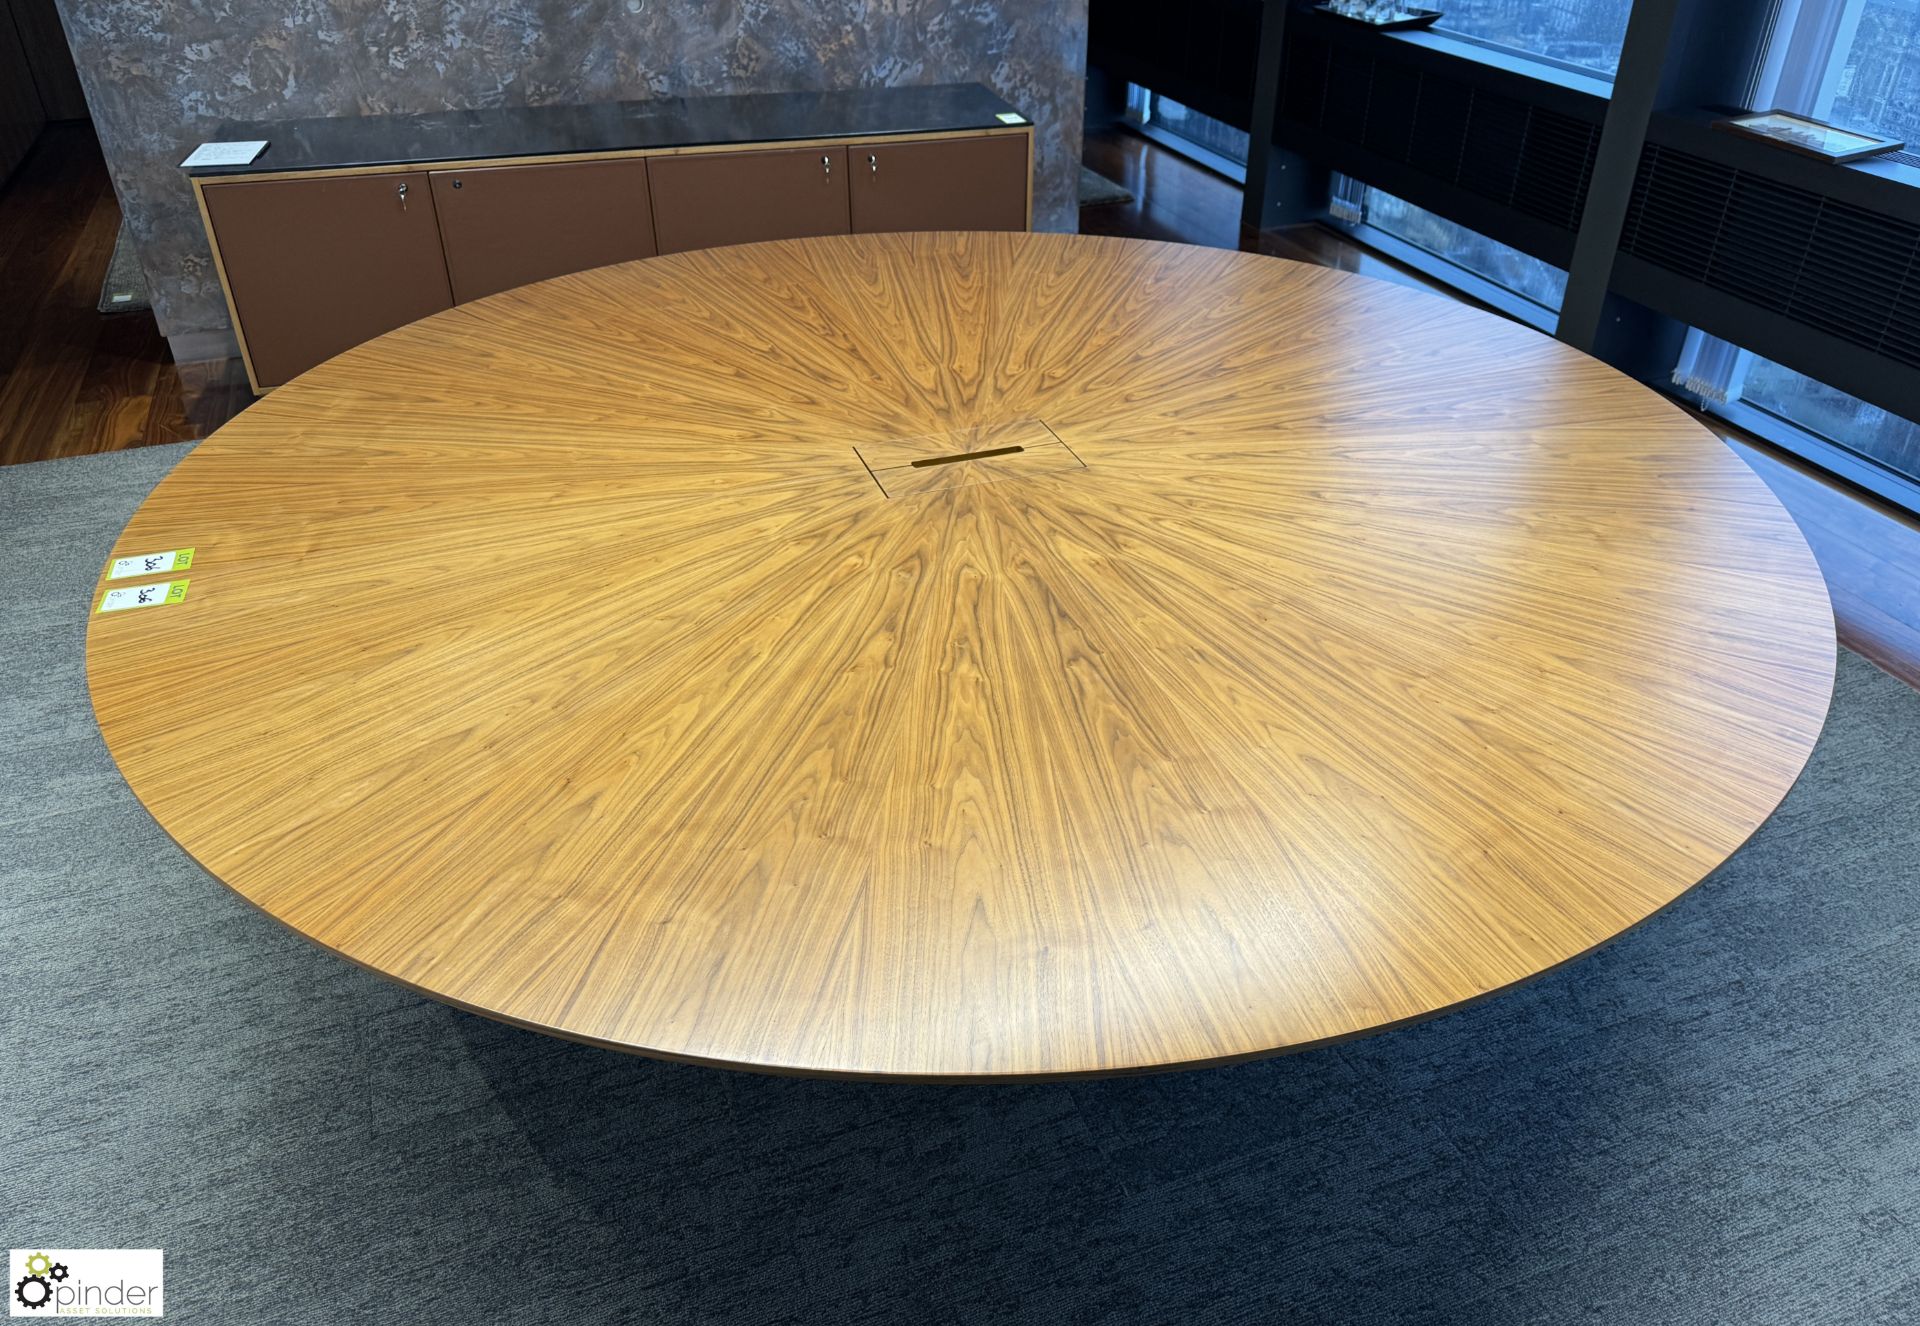 Cherry veneer circular Meeting Table, 2600mm diameter x 800mm, with cable management and central - Image 6 of 7